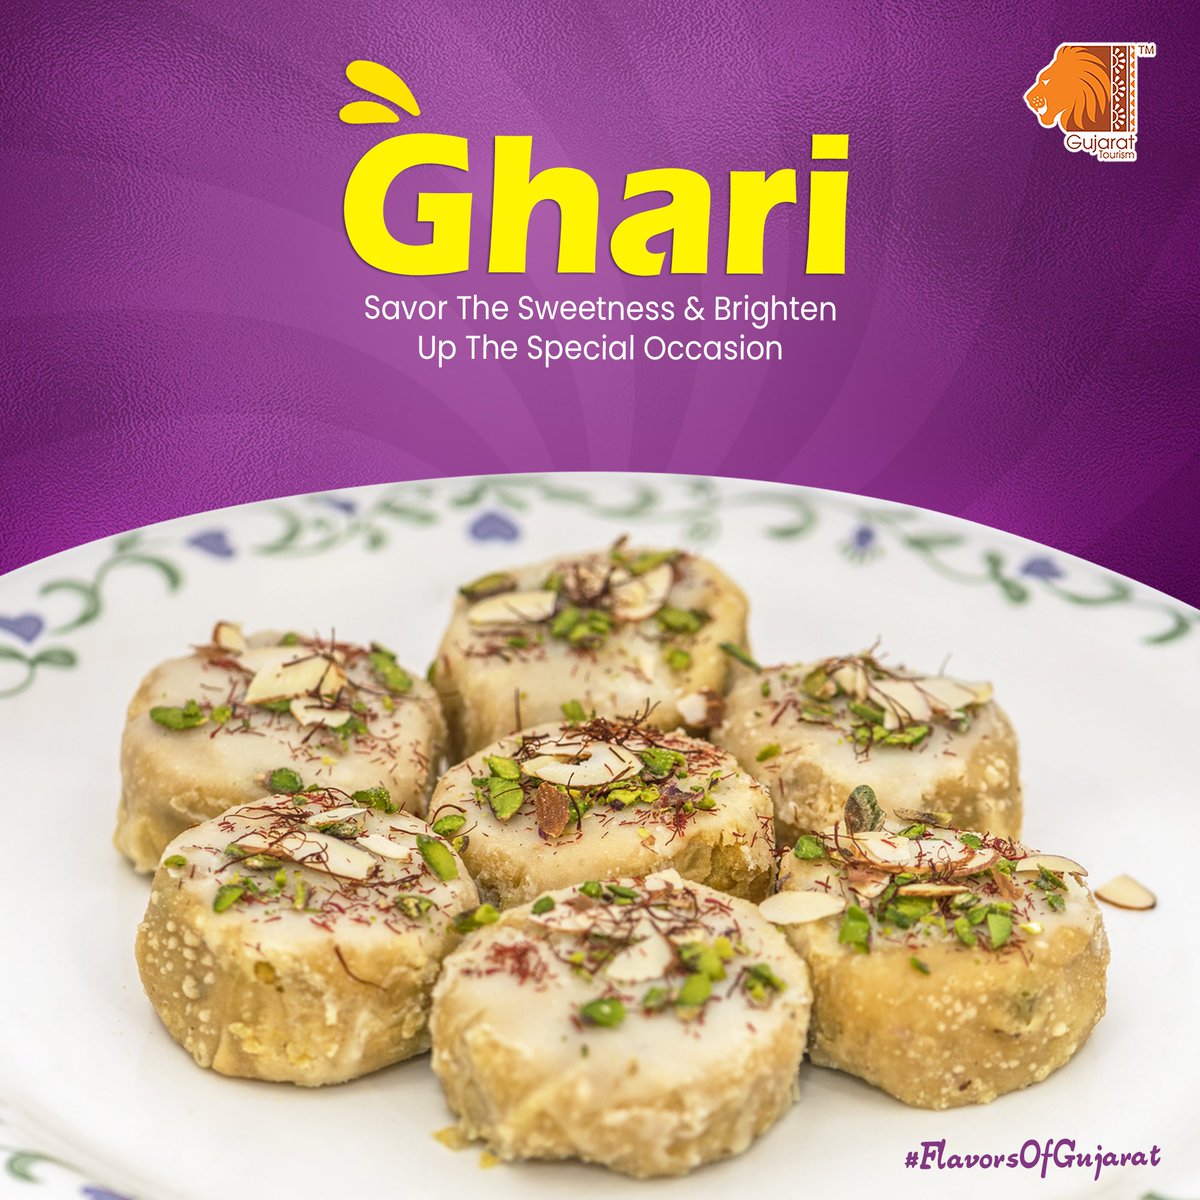 Indulge in the irresistible flavors of Ghari. This delectable sweet treat from Surat is made from refined flour, ghee, mawa, and aromatic spices to create a melt-in-your-mouth experience. 

#gujarattourism #gujarat #incredibleindia #foodheritage  #ghari #foodphotography #Foodie